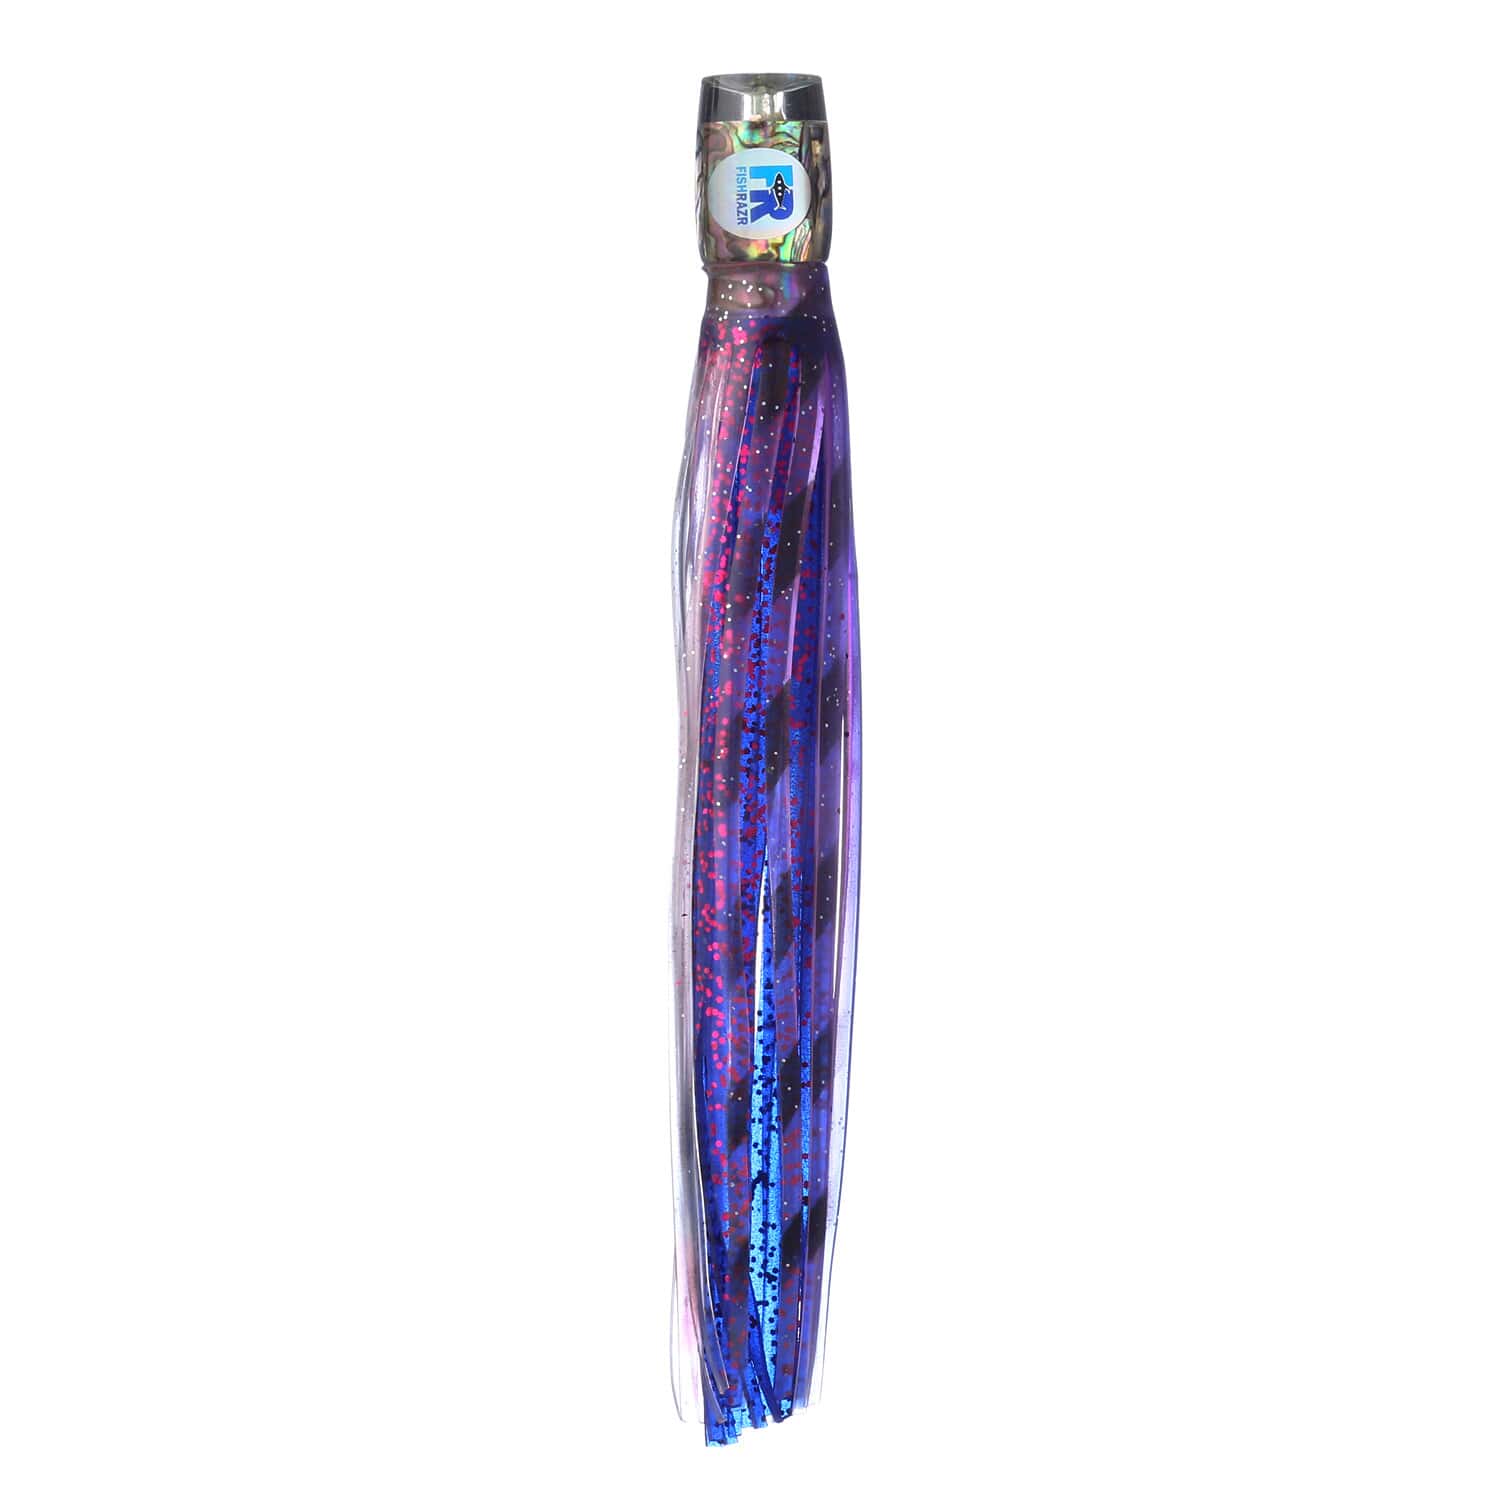 Wabo Cabo 7.5 Marlin and Tuna resin head lure with skirts